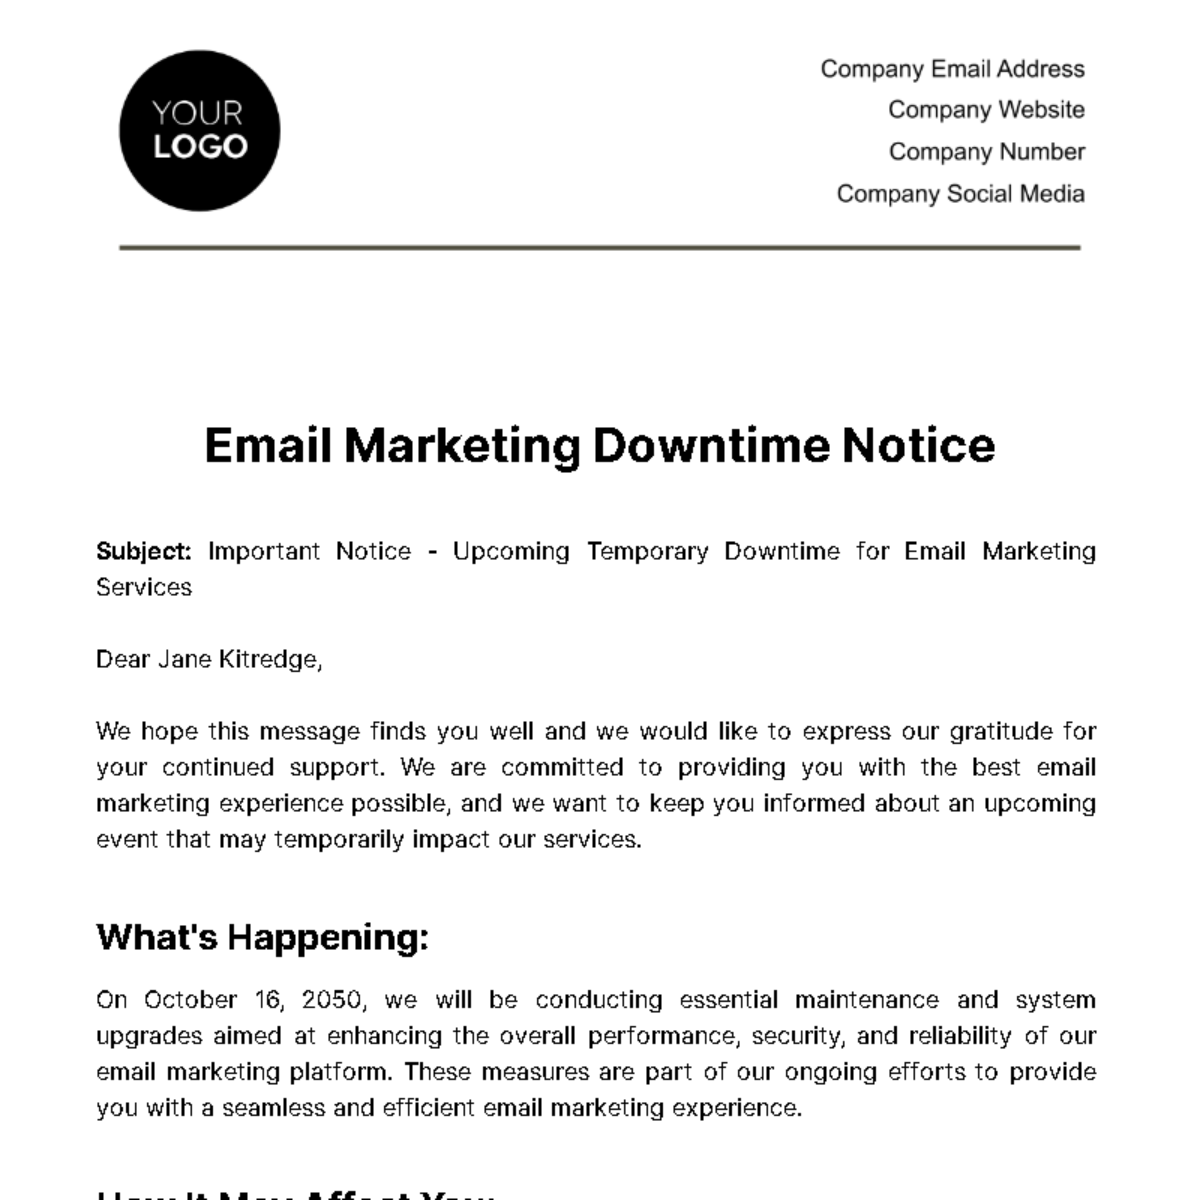 Email Marketing Downtime Notice Template